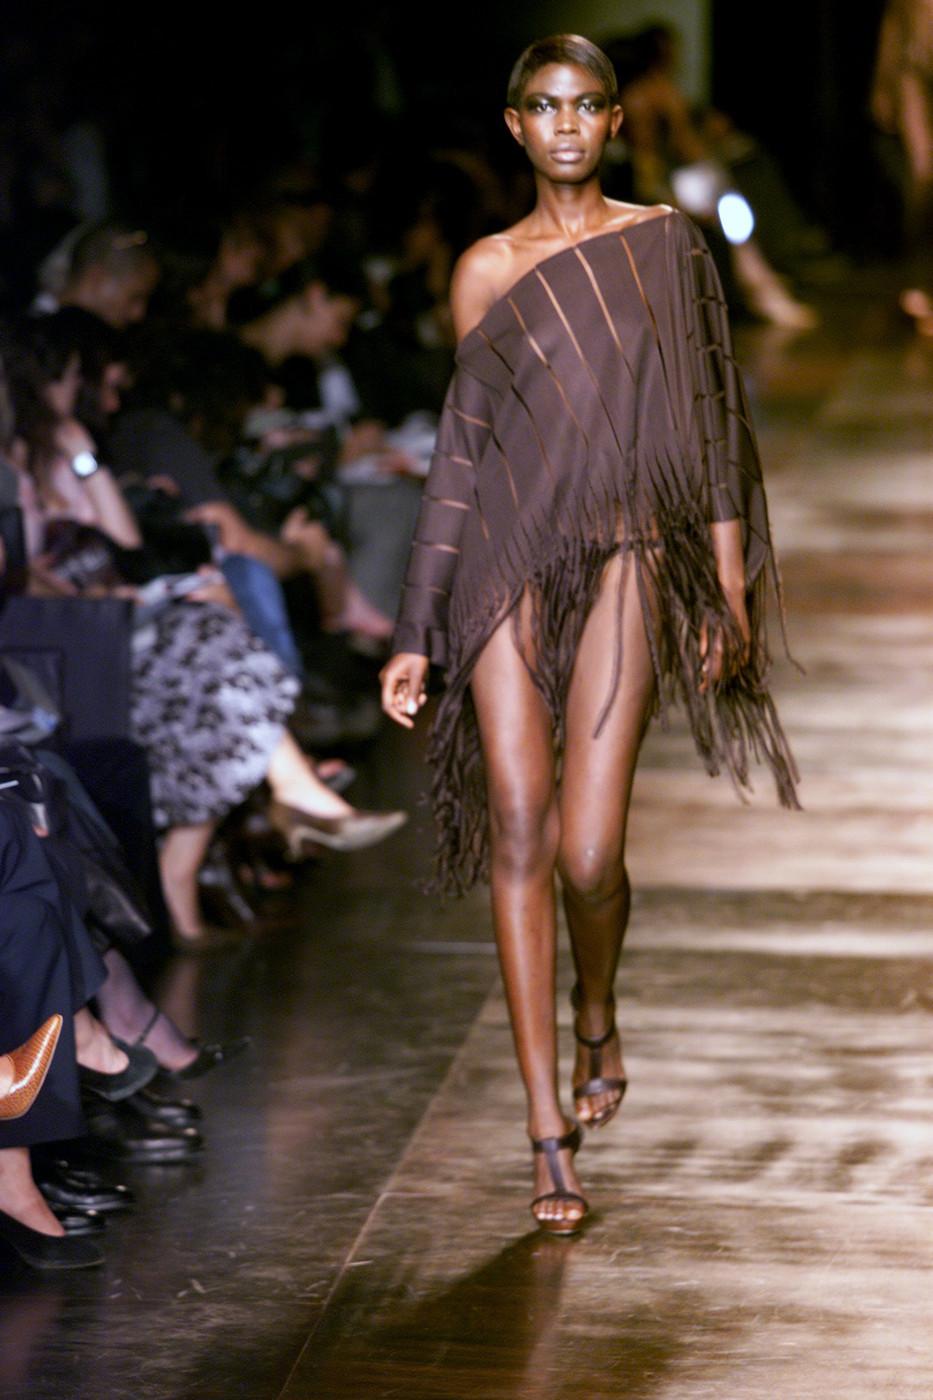 Tom Ford for Yves Saint Laurent
Spring / Summer 2002 
Brand New Without Tags
A Rare Find
Size: One Size
$1350
100% Silk
Brown Silk Runway Cape Poncho
Shown at the 2002 Spring Runway Show

Length: 39